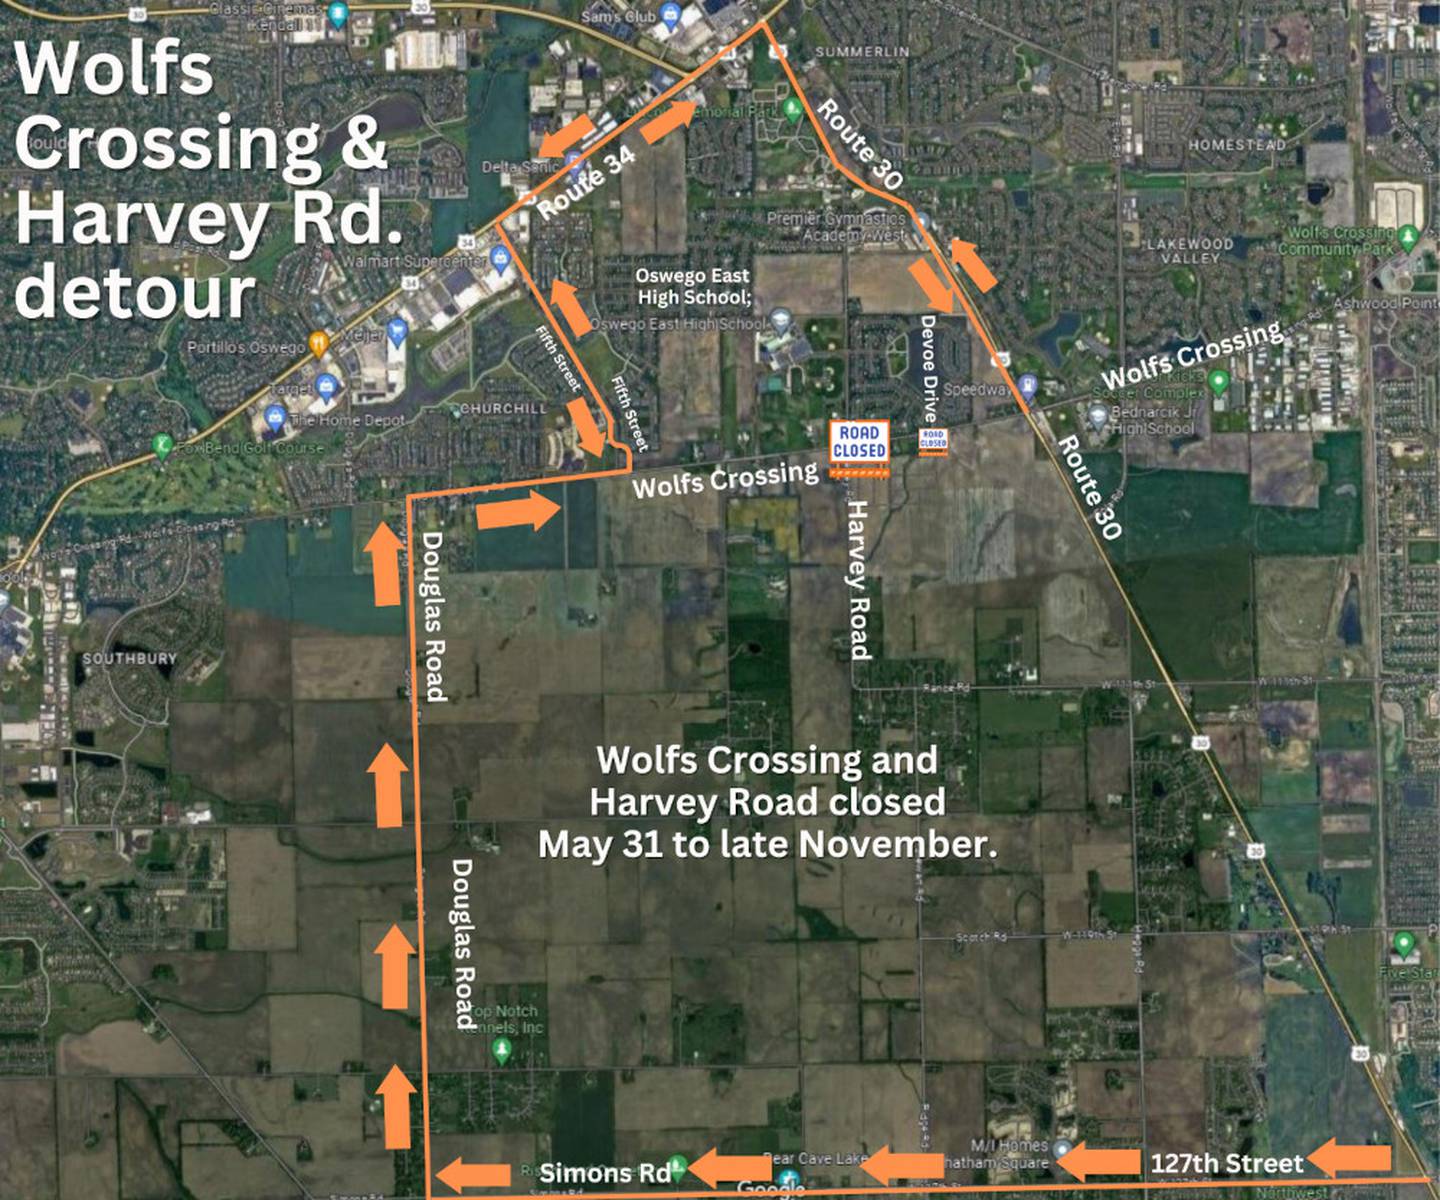 Pictured is the detour plan for the closing of the intersection of Harvey Road and Wolf's Crossing Road, effective May 31 through late November.